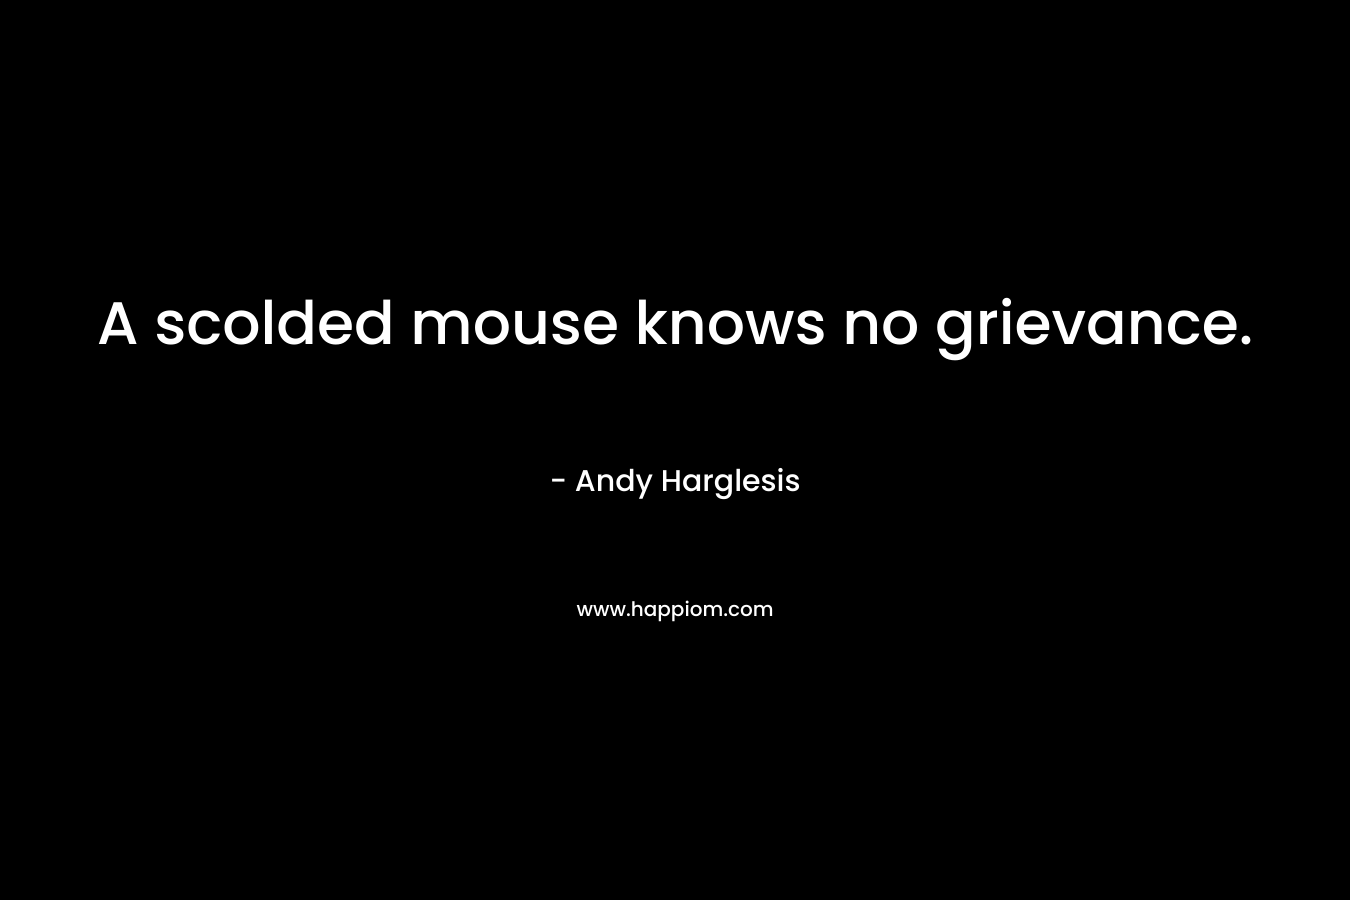 A scolded mouse knows no grievance.